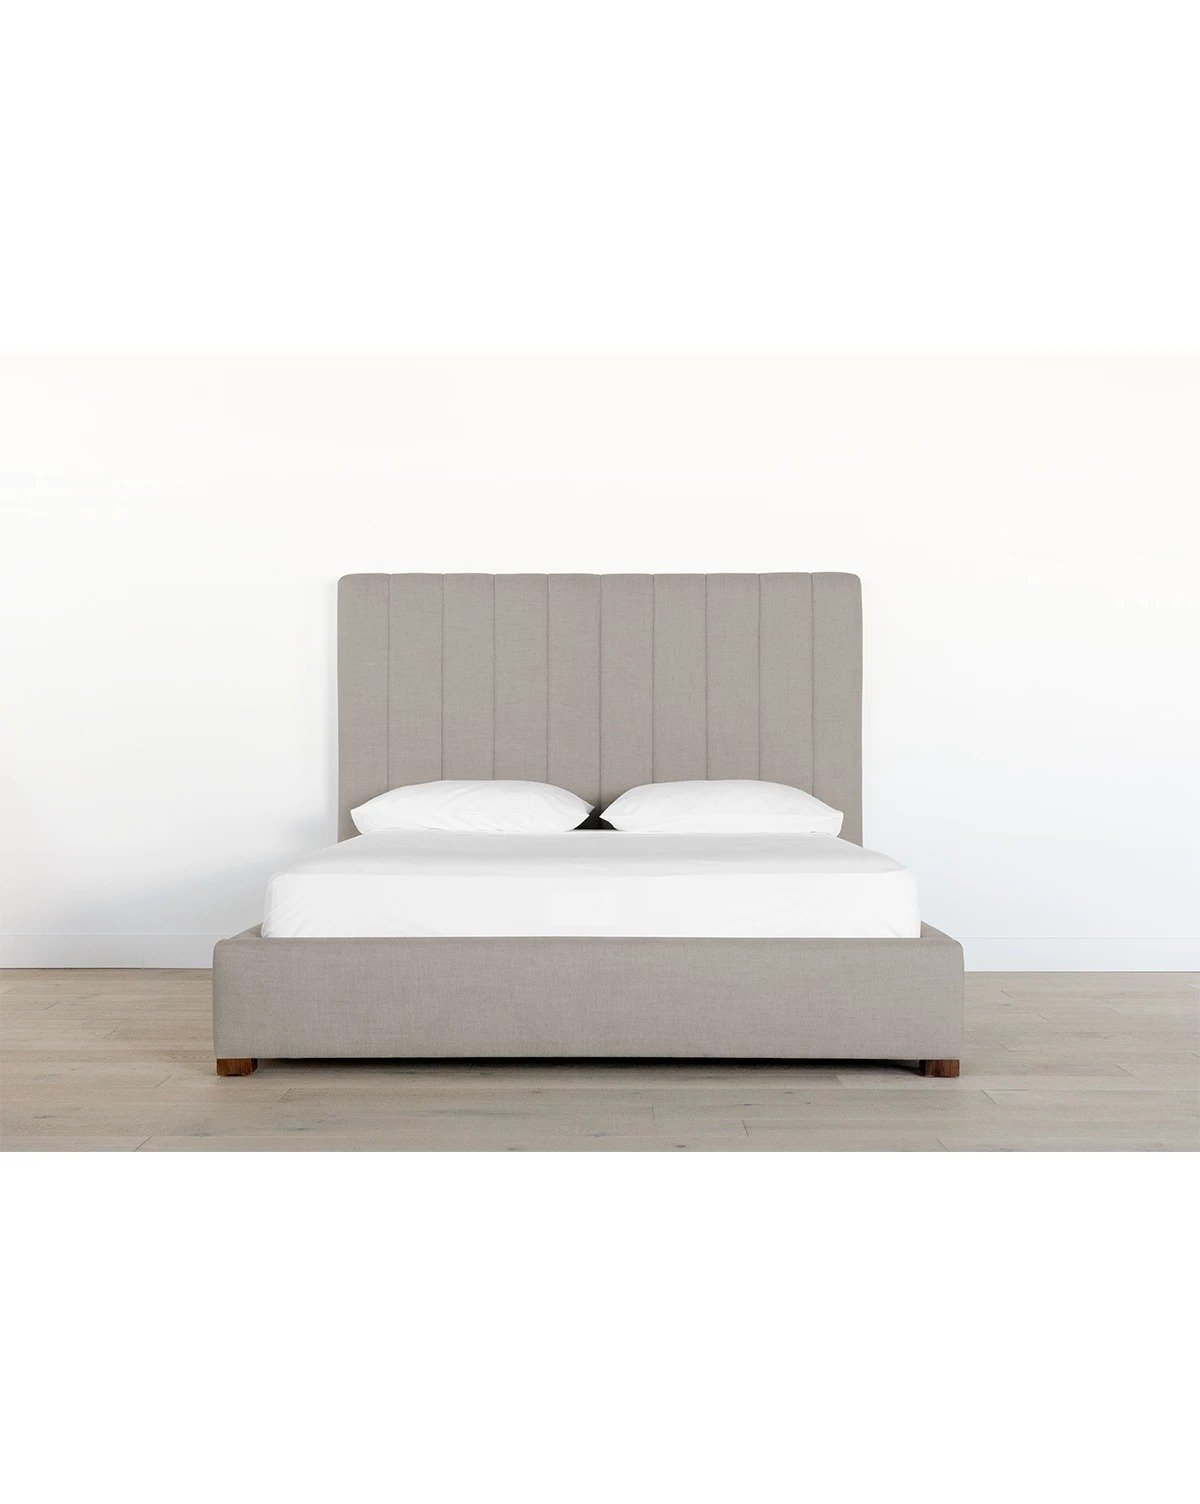 HOFFMAN BED - KING - DOVE CRYPTON - Image 0